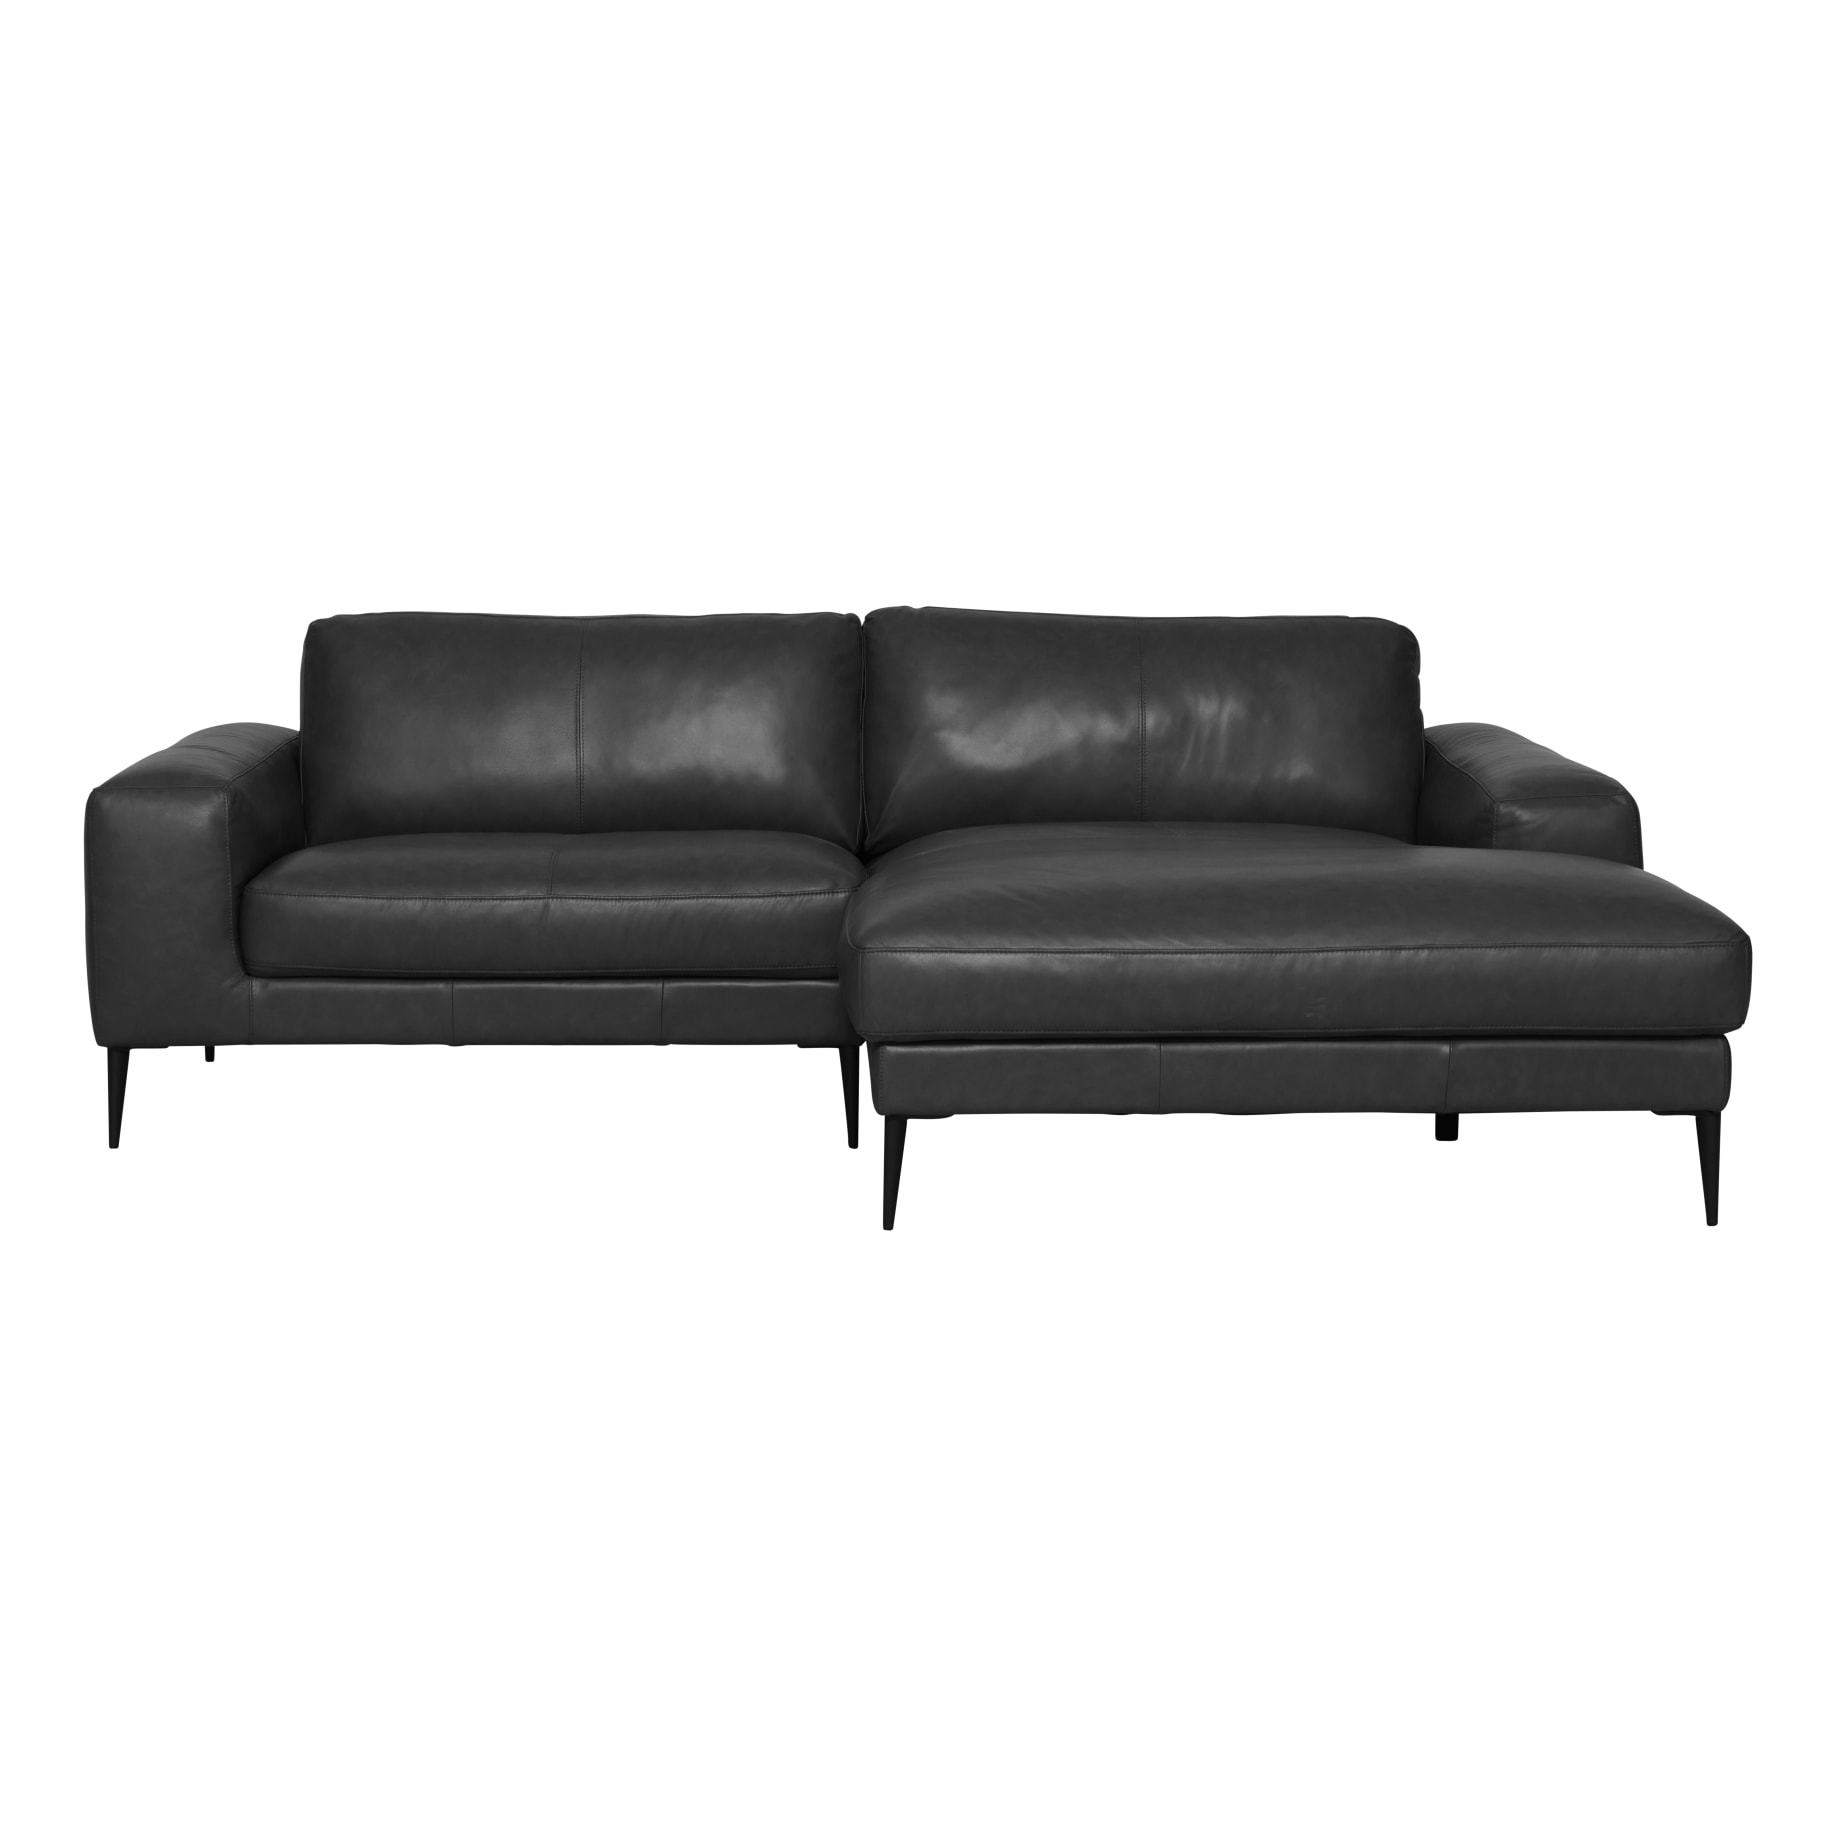 Amory Double Chaise Sofa RHF in Alpine Leather Black